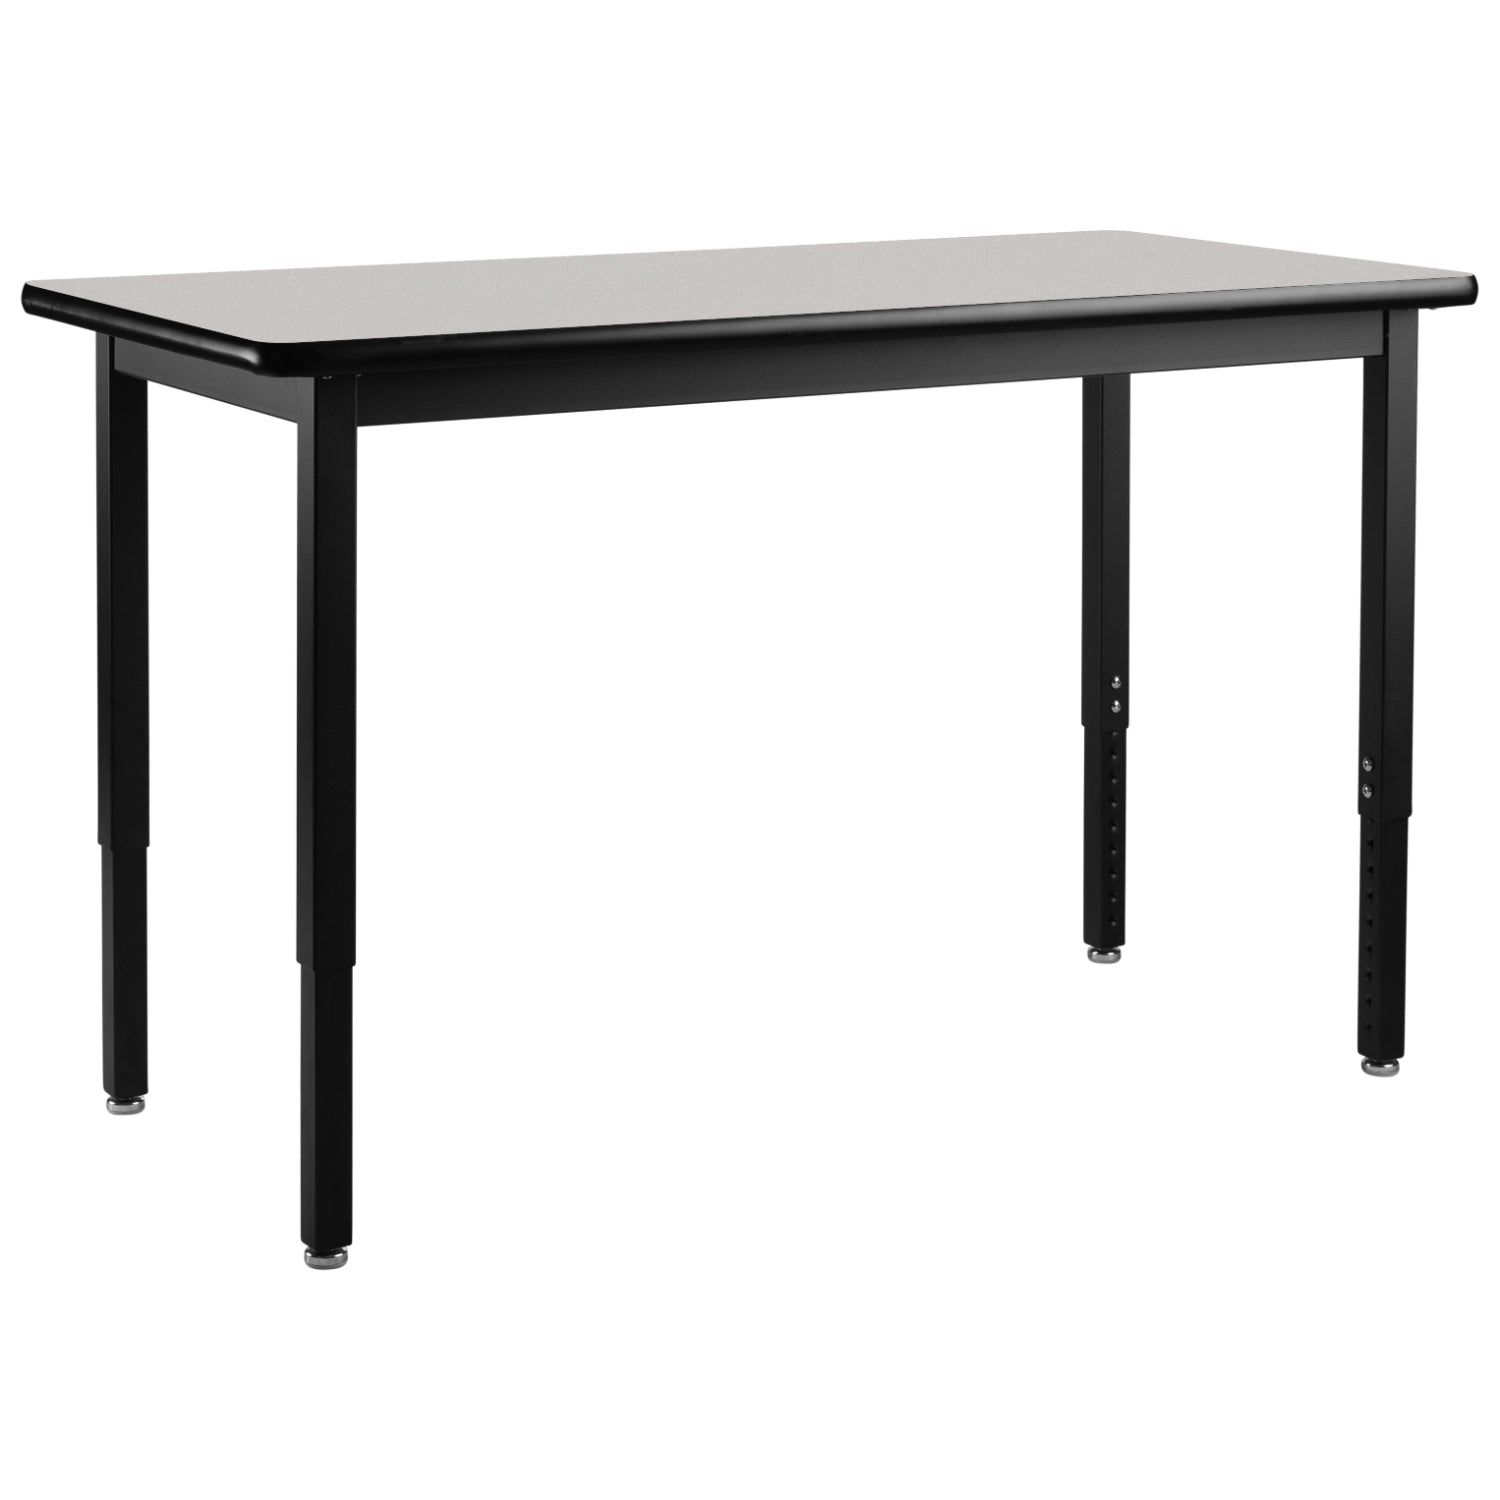 Heavy-Duty Height-Adjustable Utility Table, Black Frame, 18" x 54", Supreme High-Pressure Laminate Top with Black ProtectEdge